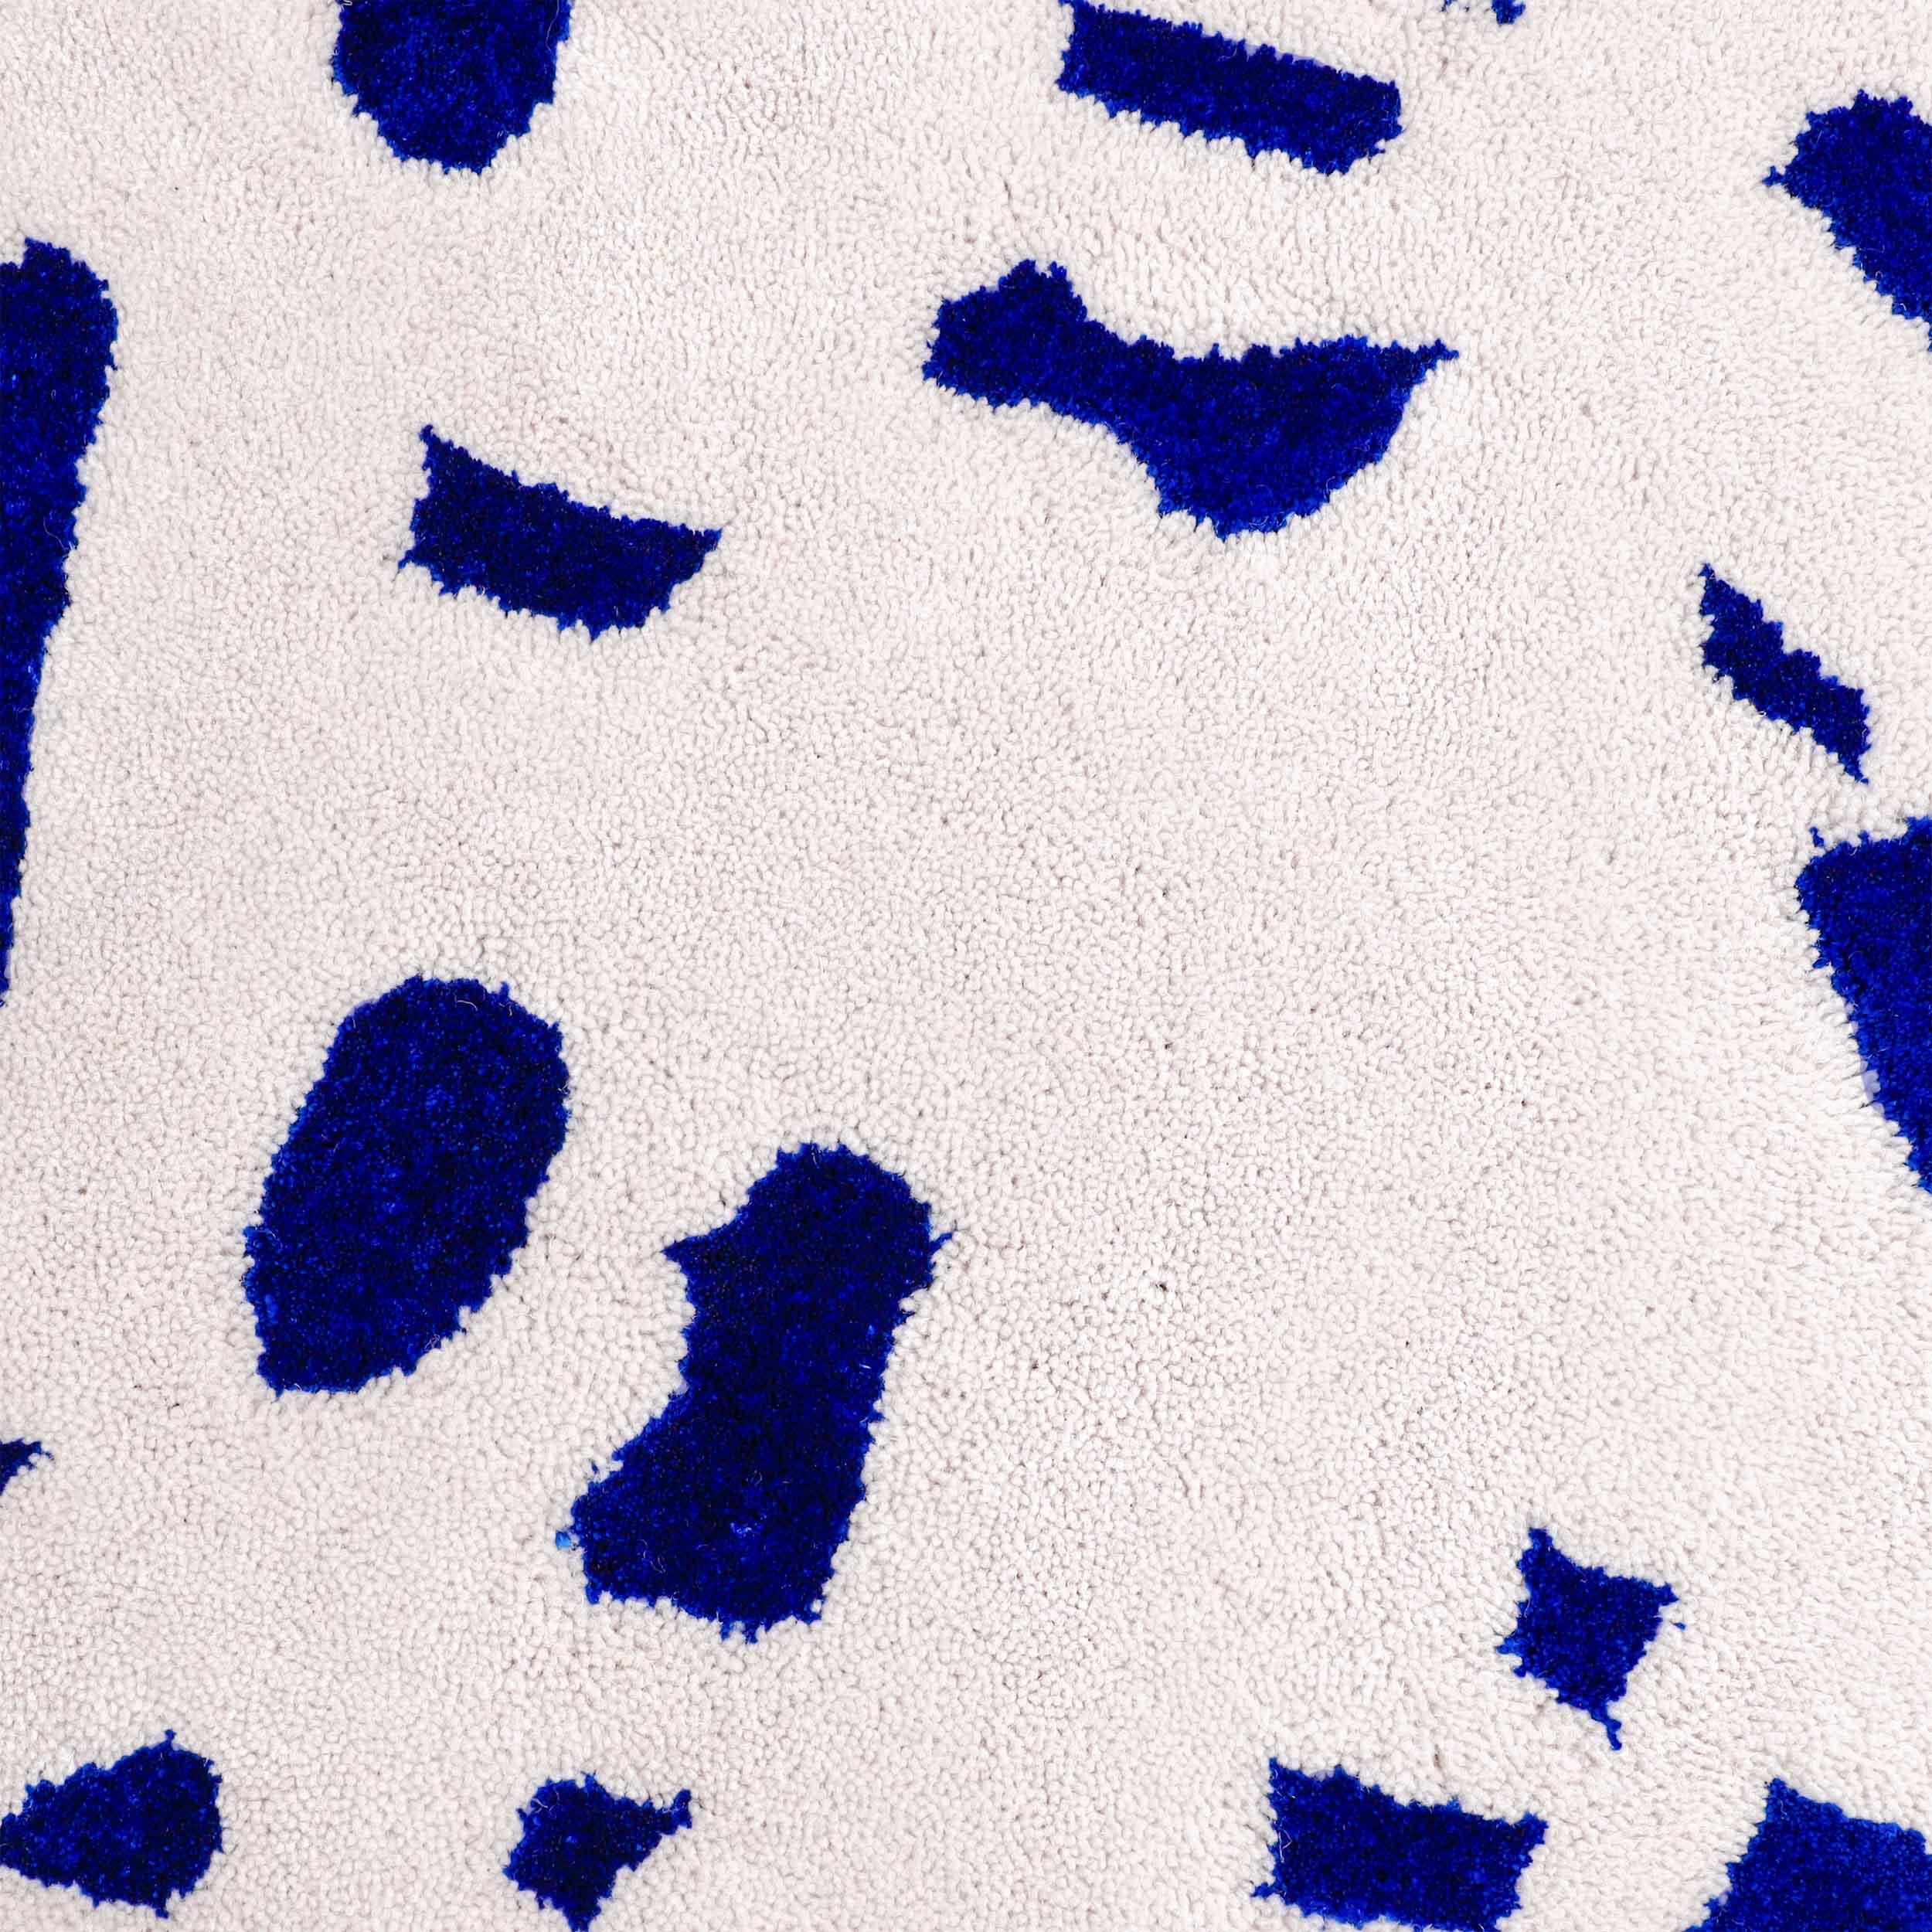 Speckled squiggle features a durable wool surface with a pattern of shiny blue viscose speckles.

Size: 7 x 10 ft 
Material: Wool + Viscose
Color: Off-White/light gray + Electric Blue*
Made in Sweden

*Colors may vary due to lighting and photography